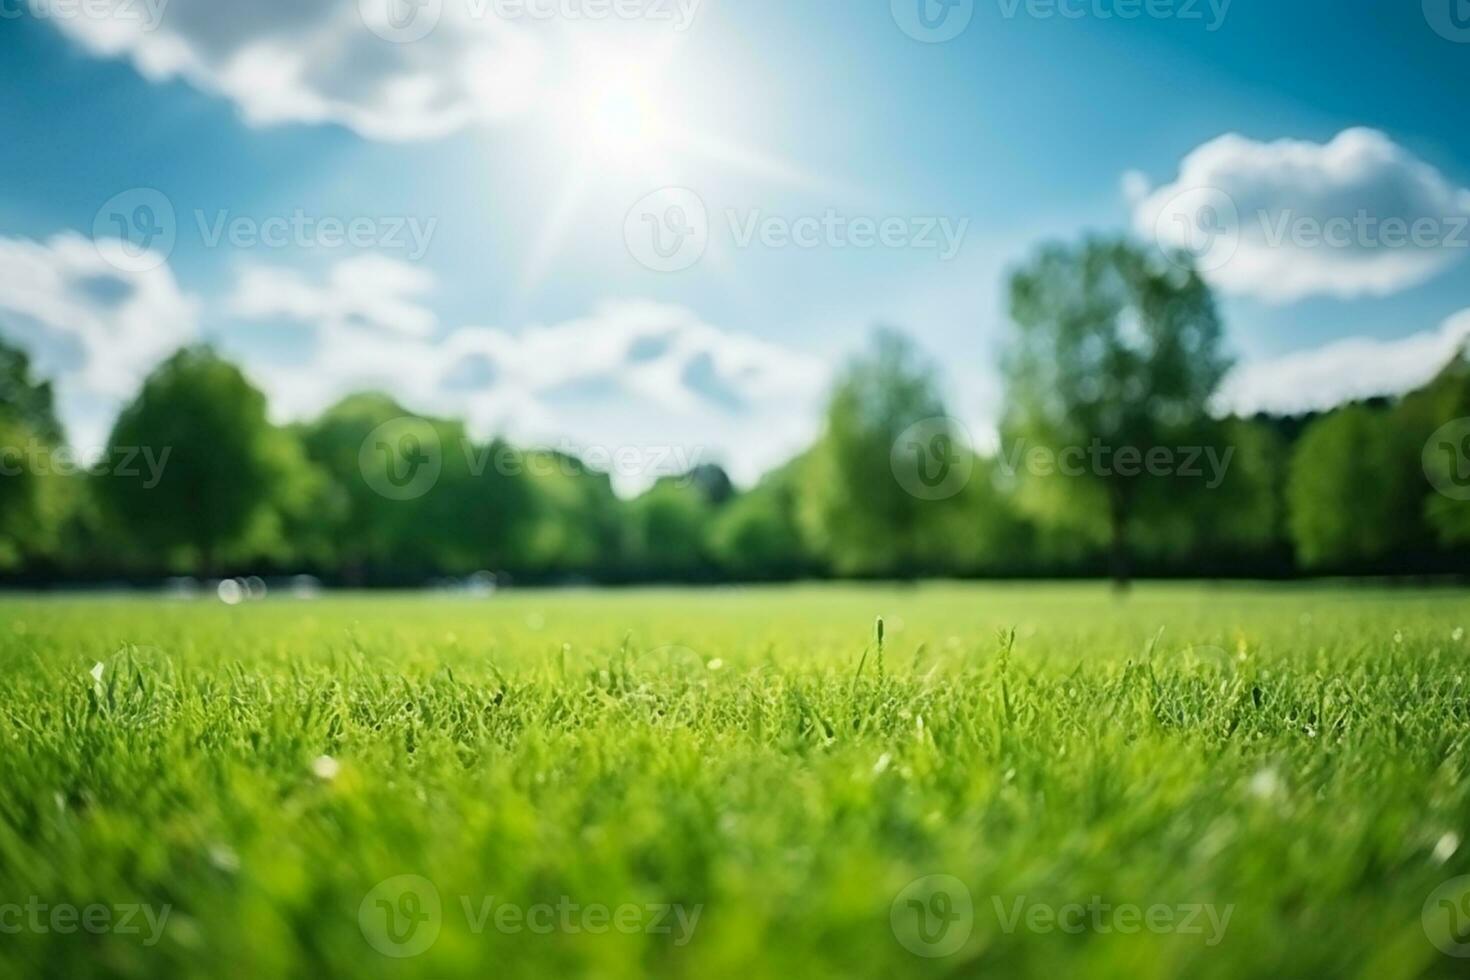 AI generated Beautiful blurred background image of spring nature with a neatly trimmed lawn surrounded by trees against a blue sky with clouds on a bright sunny day photo